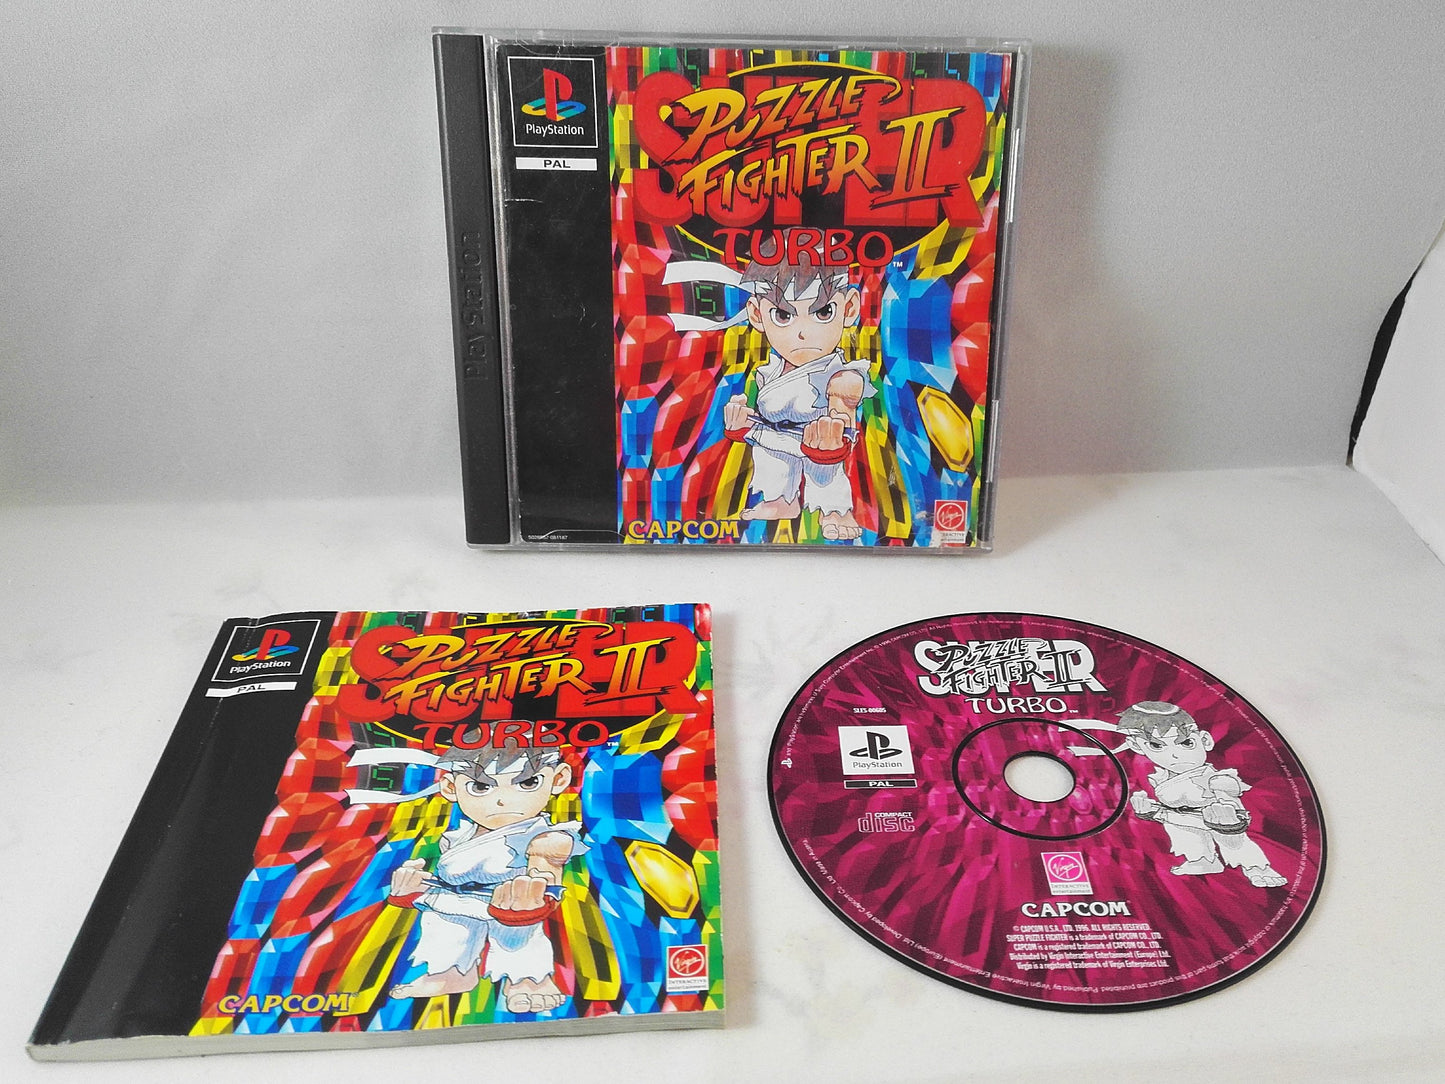 Super Puzzle Fighter II Turbo PS1 (Sony PlayStation 1) game